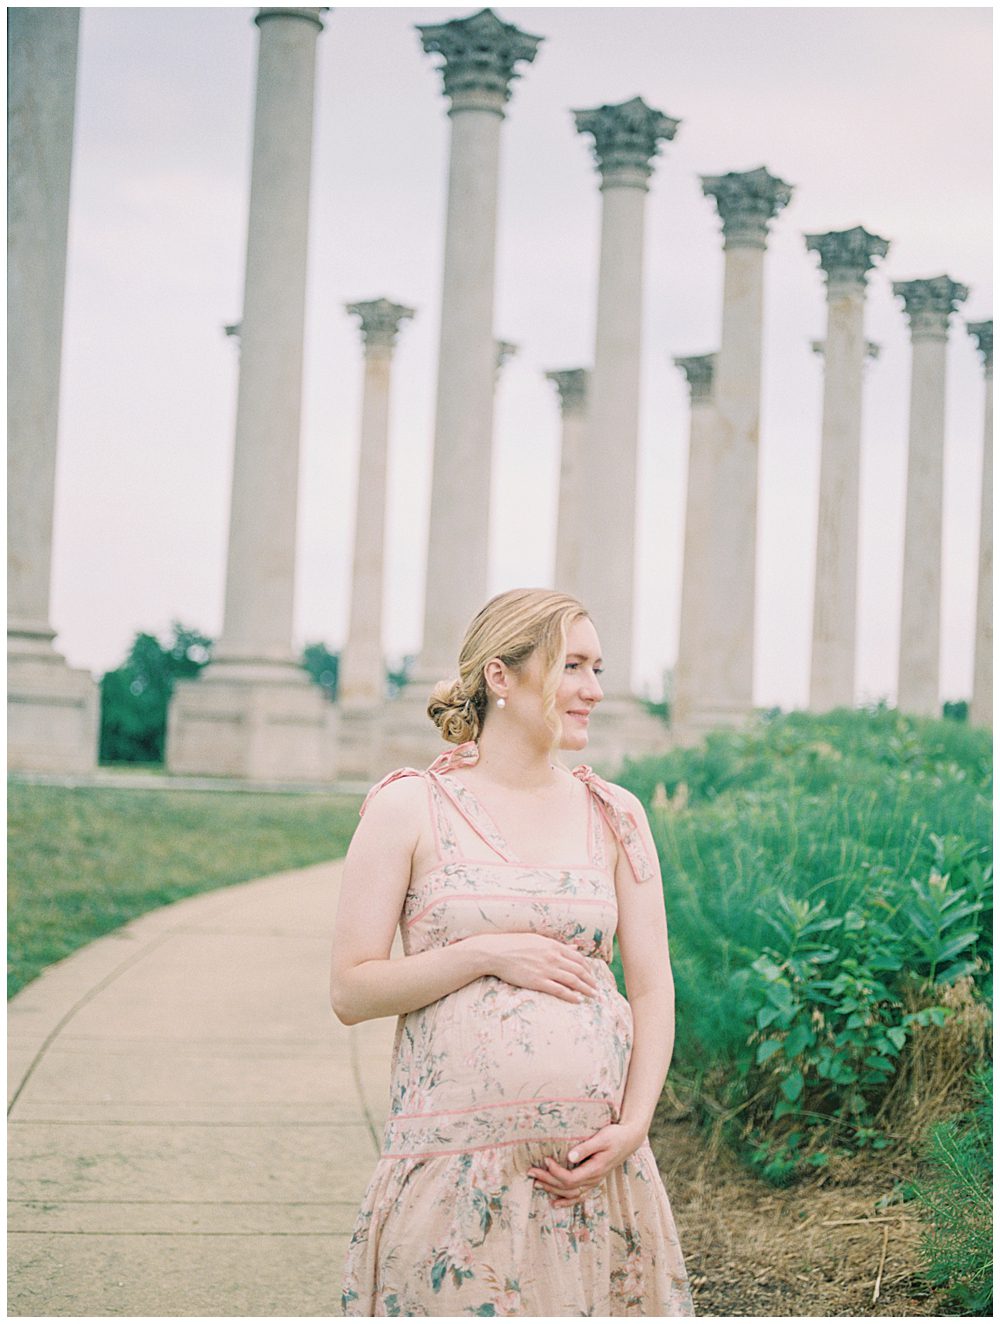 Blonde pregnant mother stands in front of National Arboretum columns during her maternity session.